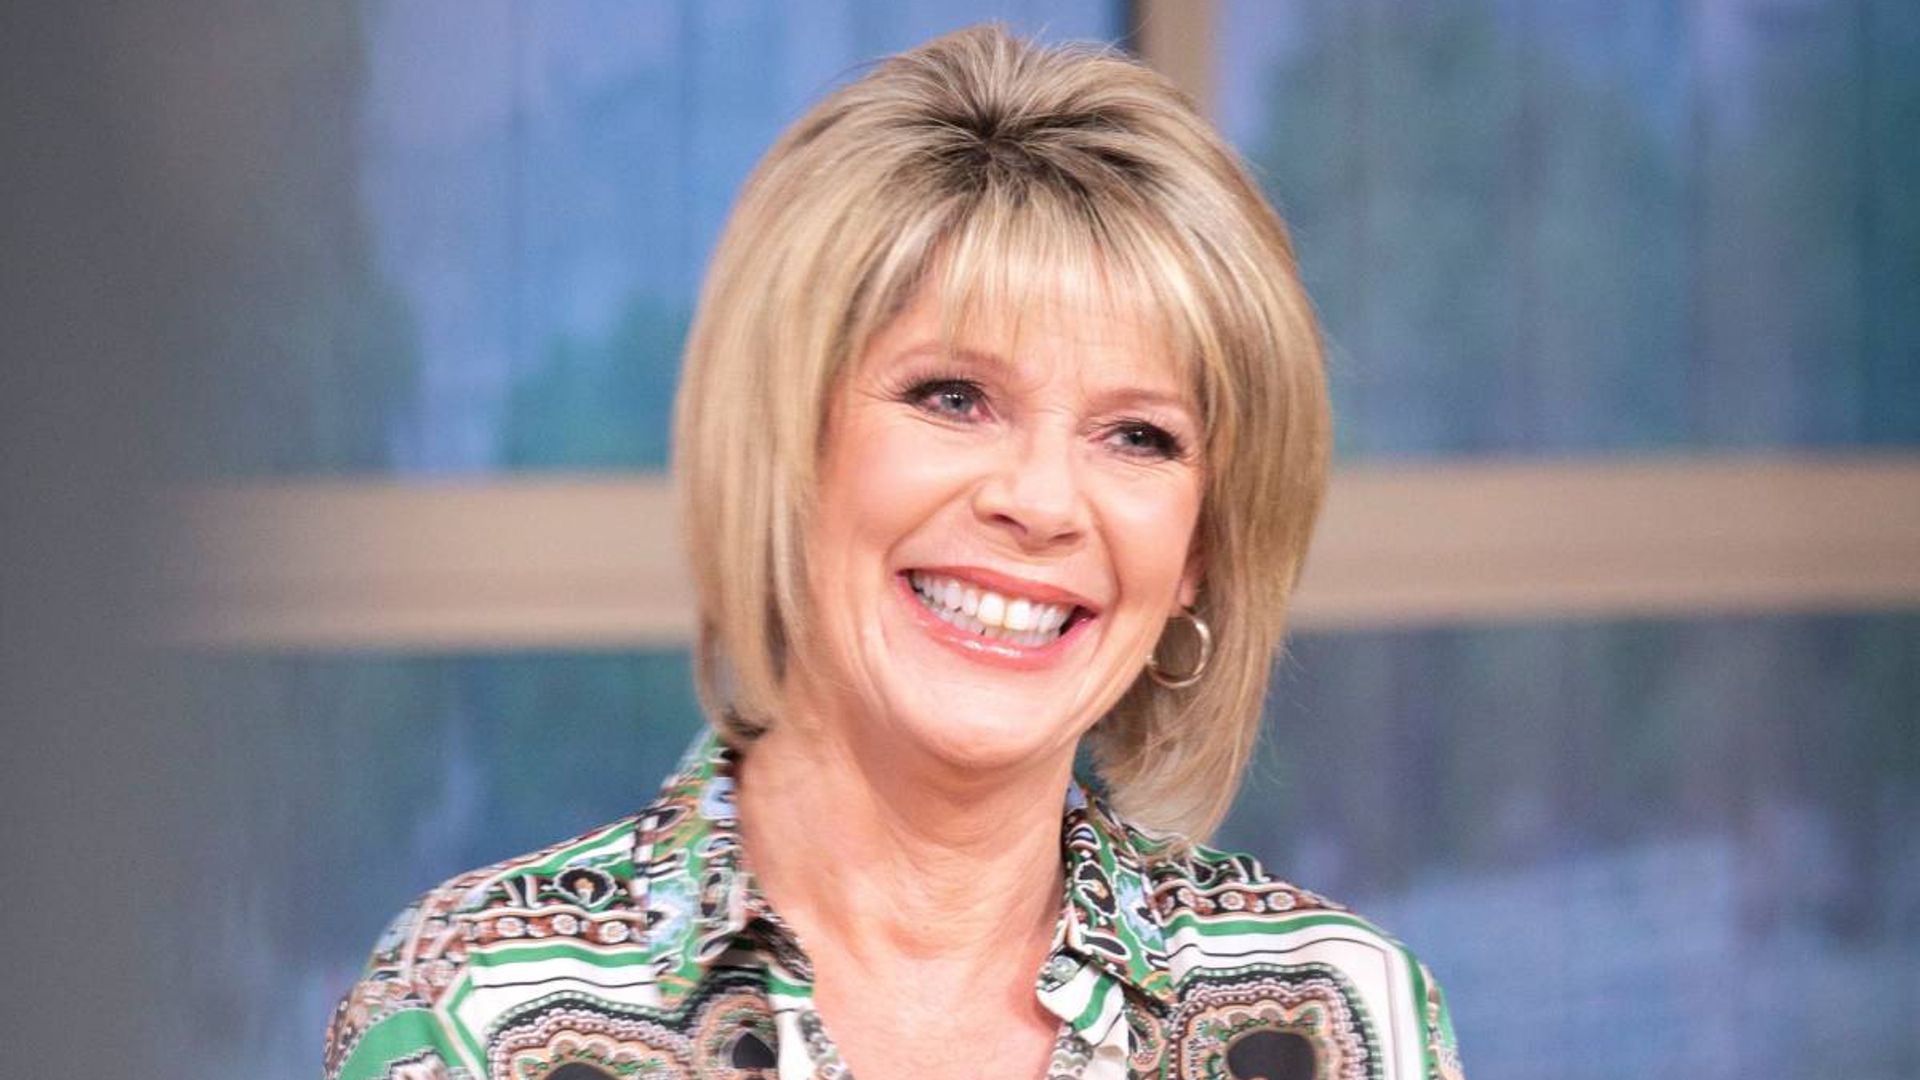 Ruth Langsford has some exciting news for her fashion fans